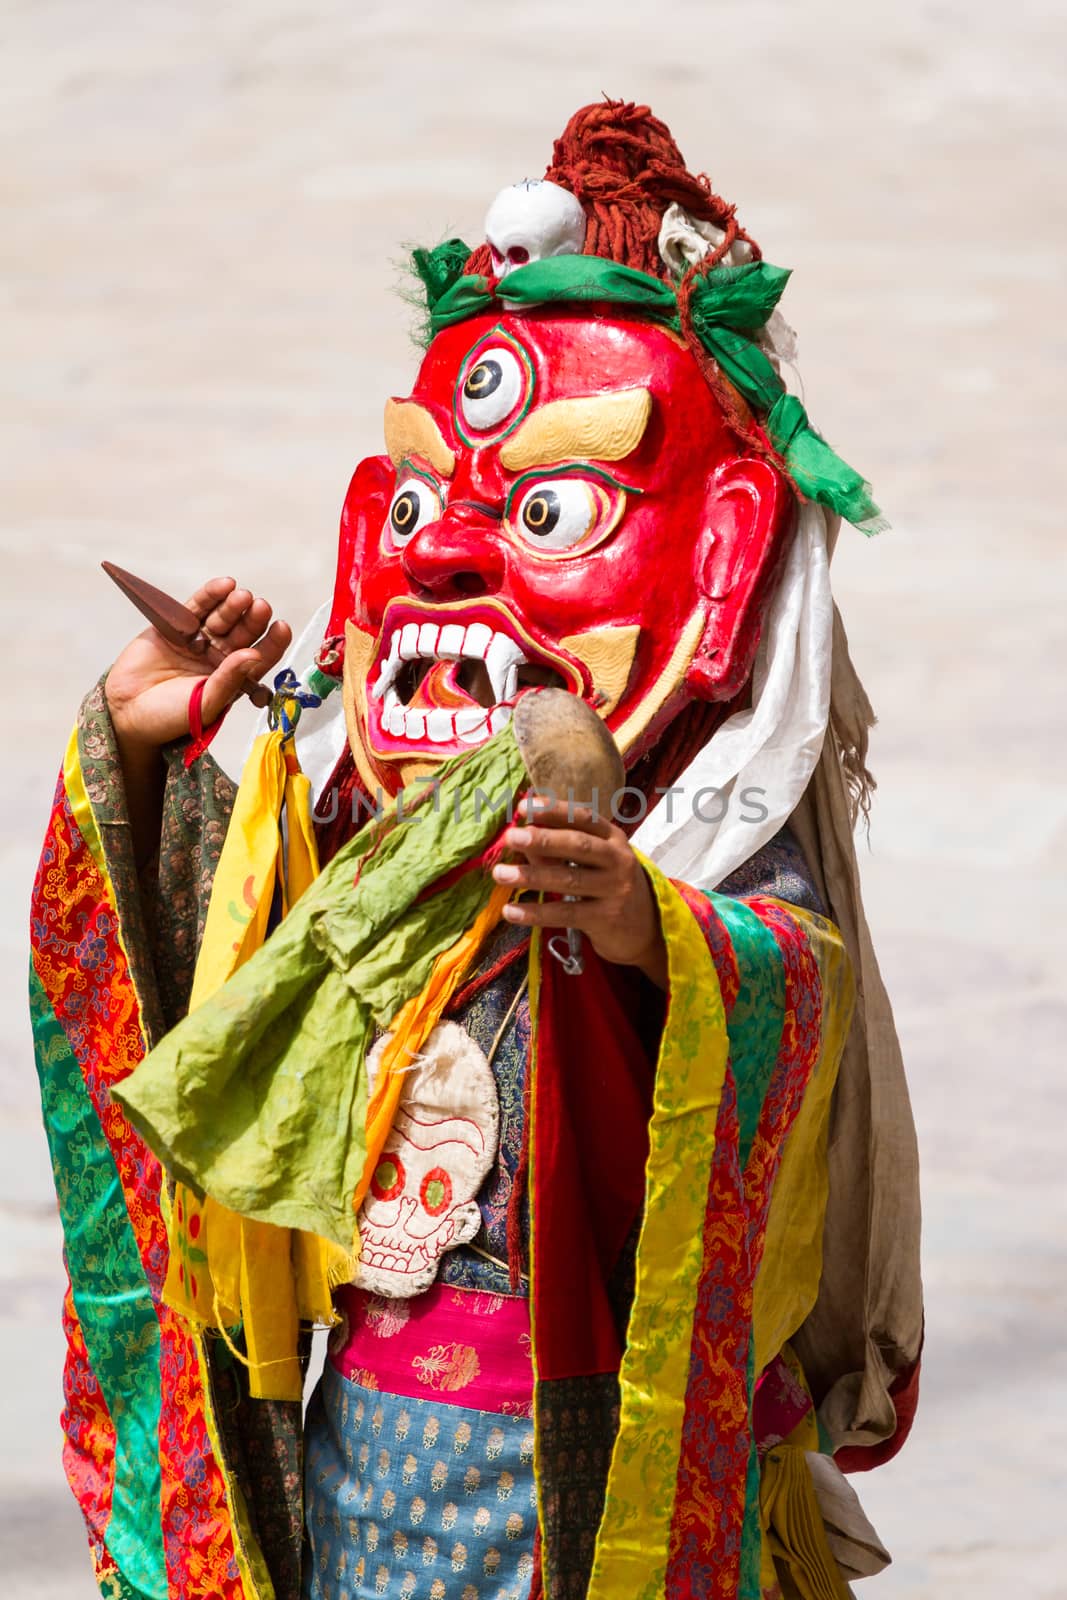 Unidentified monk with phurpa (ritual knife) performs a religious masked and costumed mystery dance of Tibetan Buddhism during the Cham Dance Festival by straannick